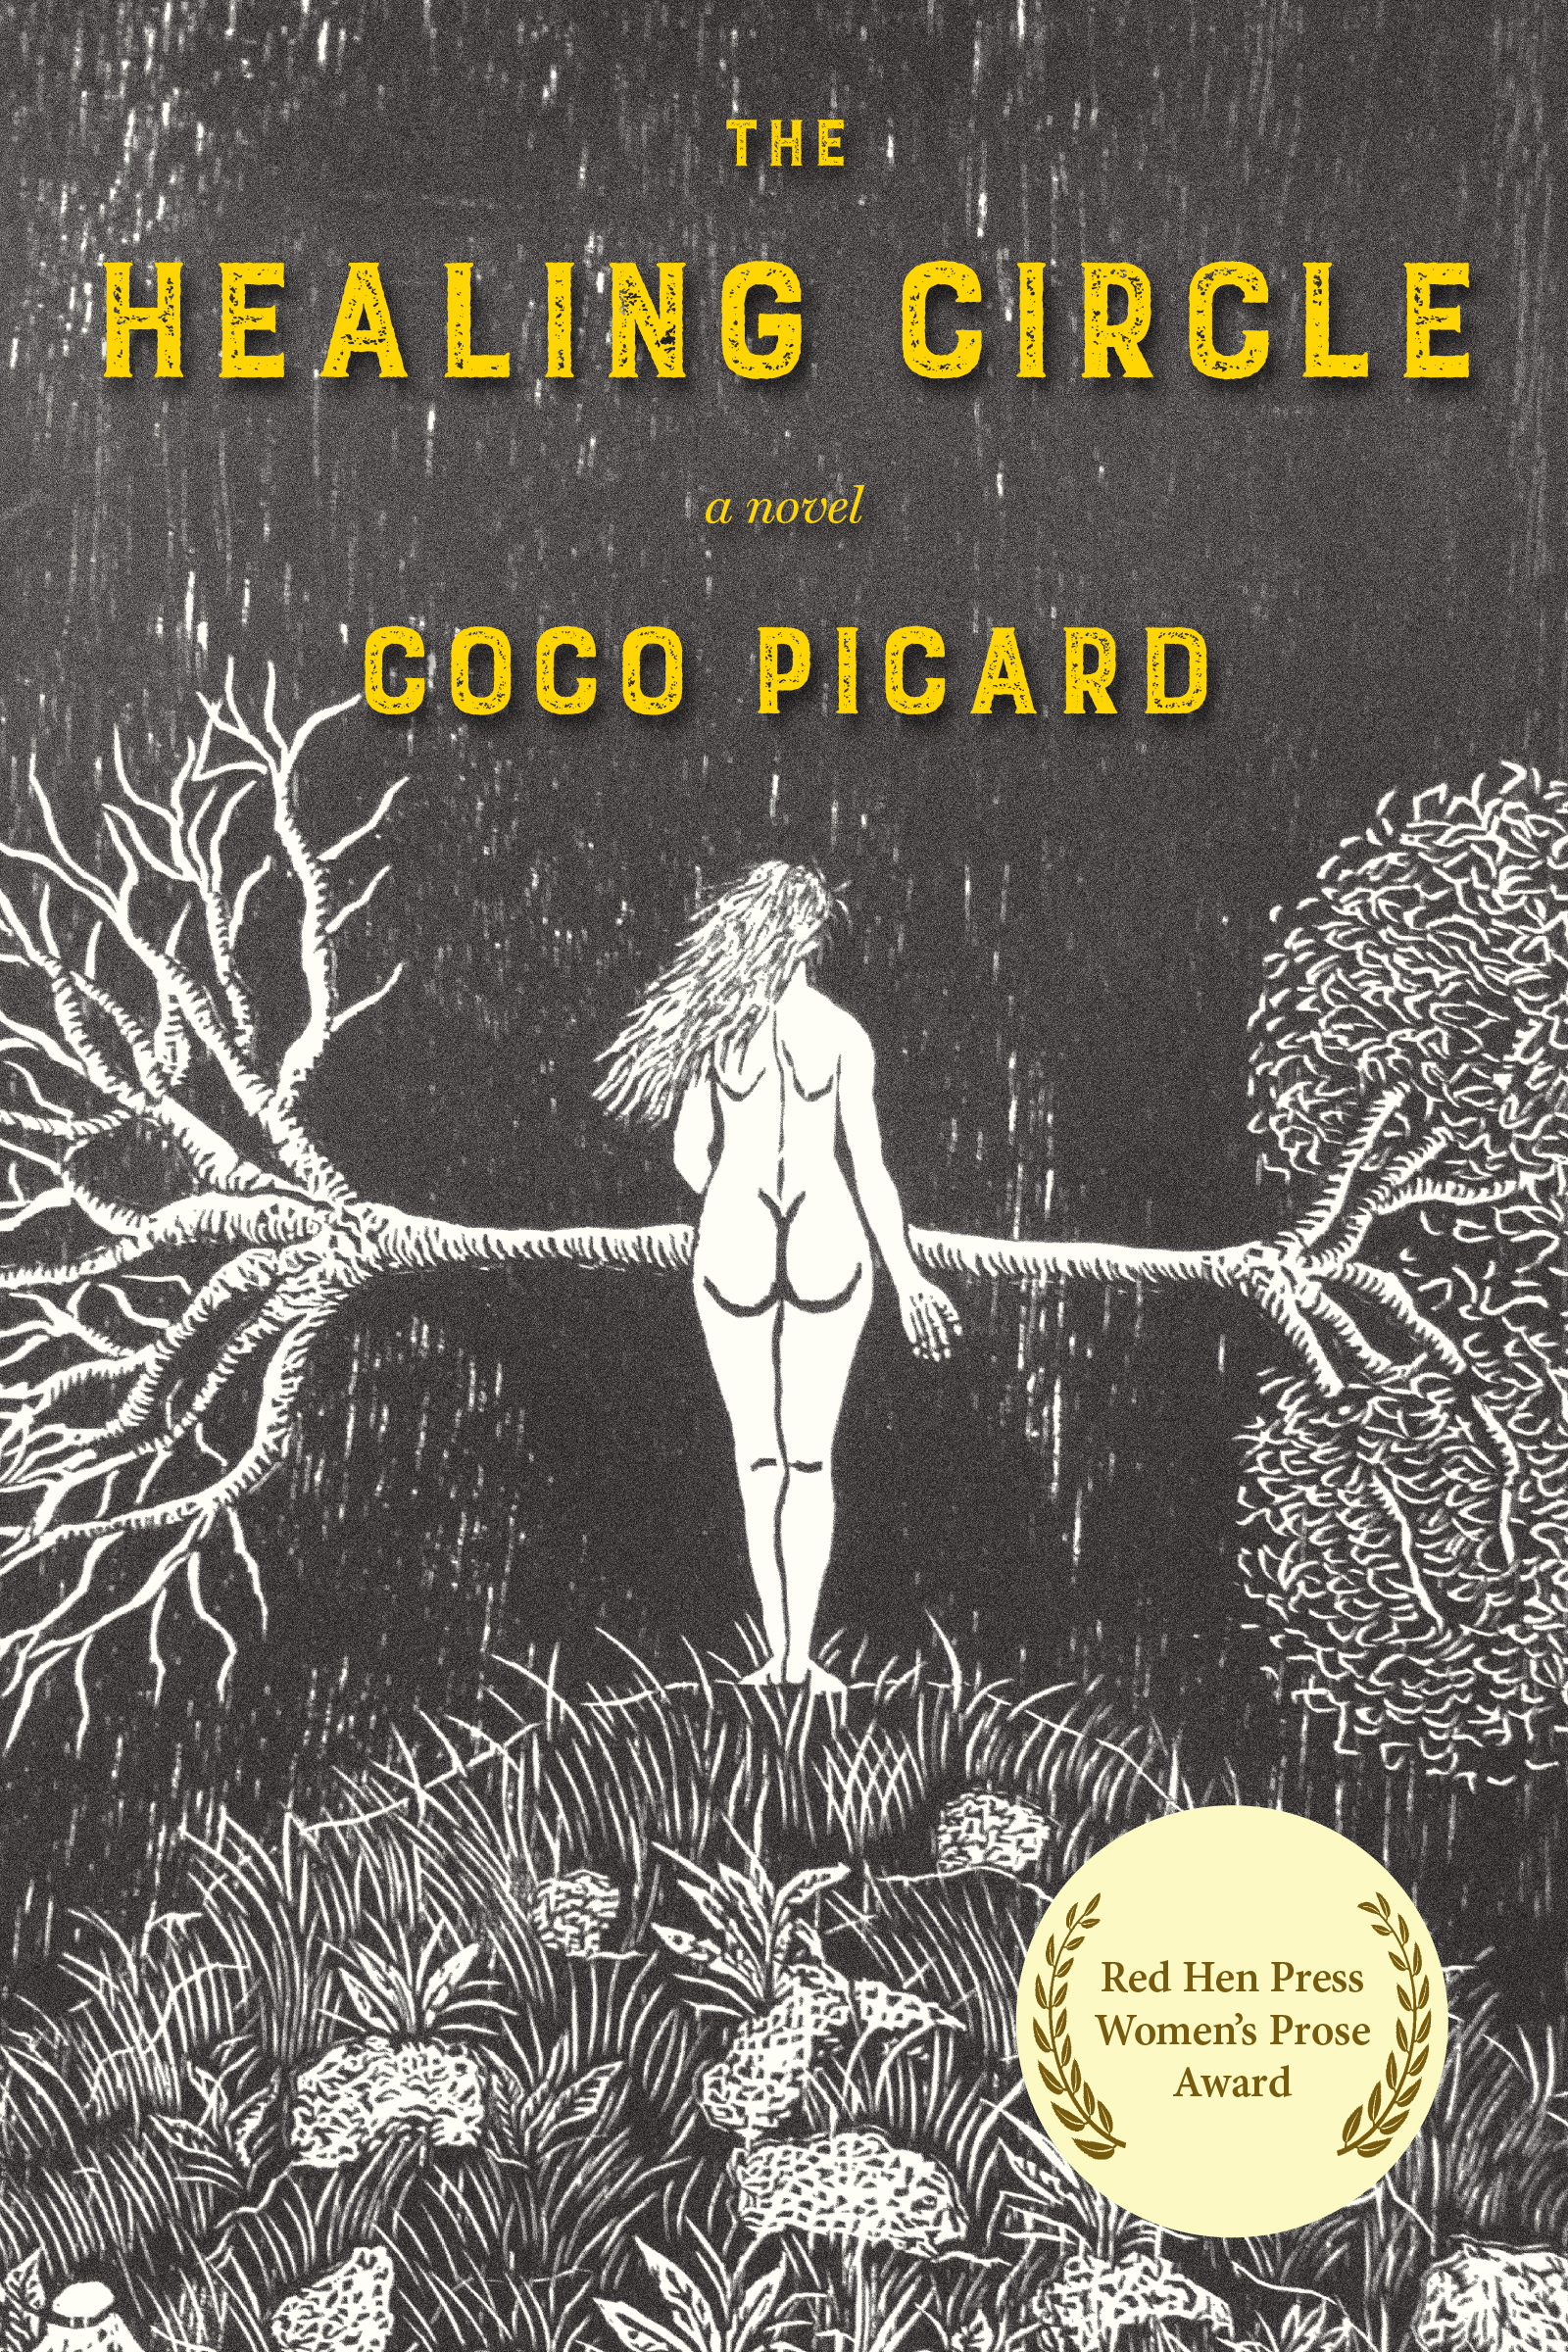 Black and white illsutration of the backside of a nude woman atop a hill with two trees seemingly growing horizontally out of her. Yellow text reads "The Healing Circle, a novel by Coco Picard" with an award seal declaring the book "Winner of the Red Hen Press Women's Prose Award"